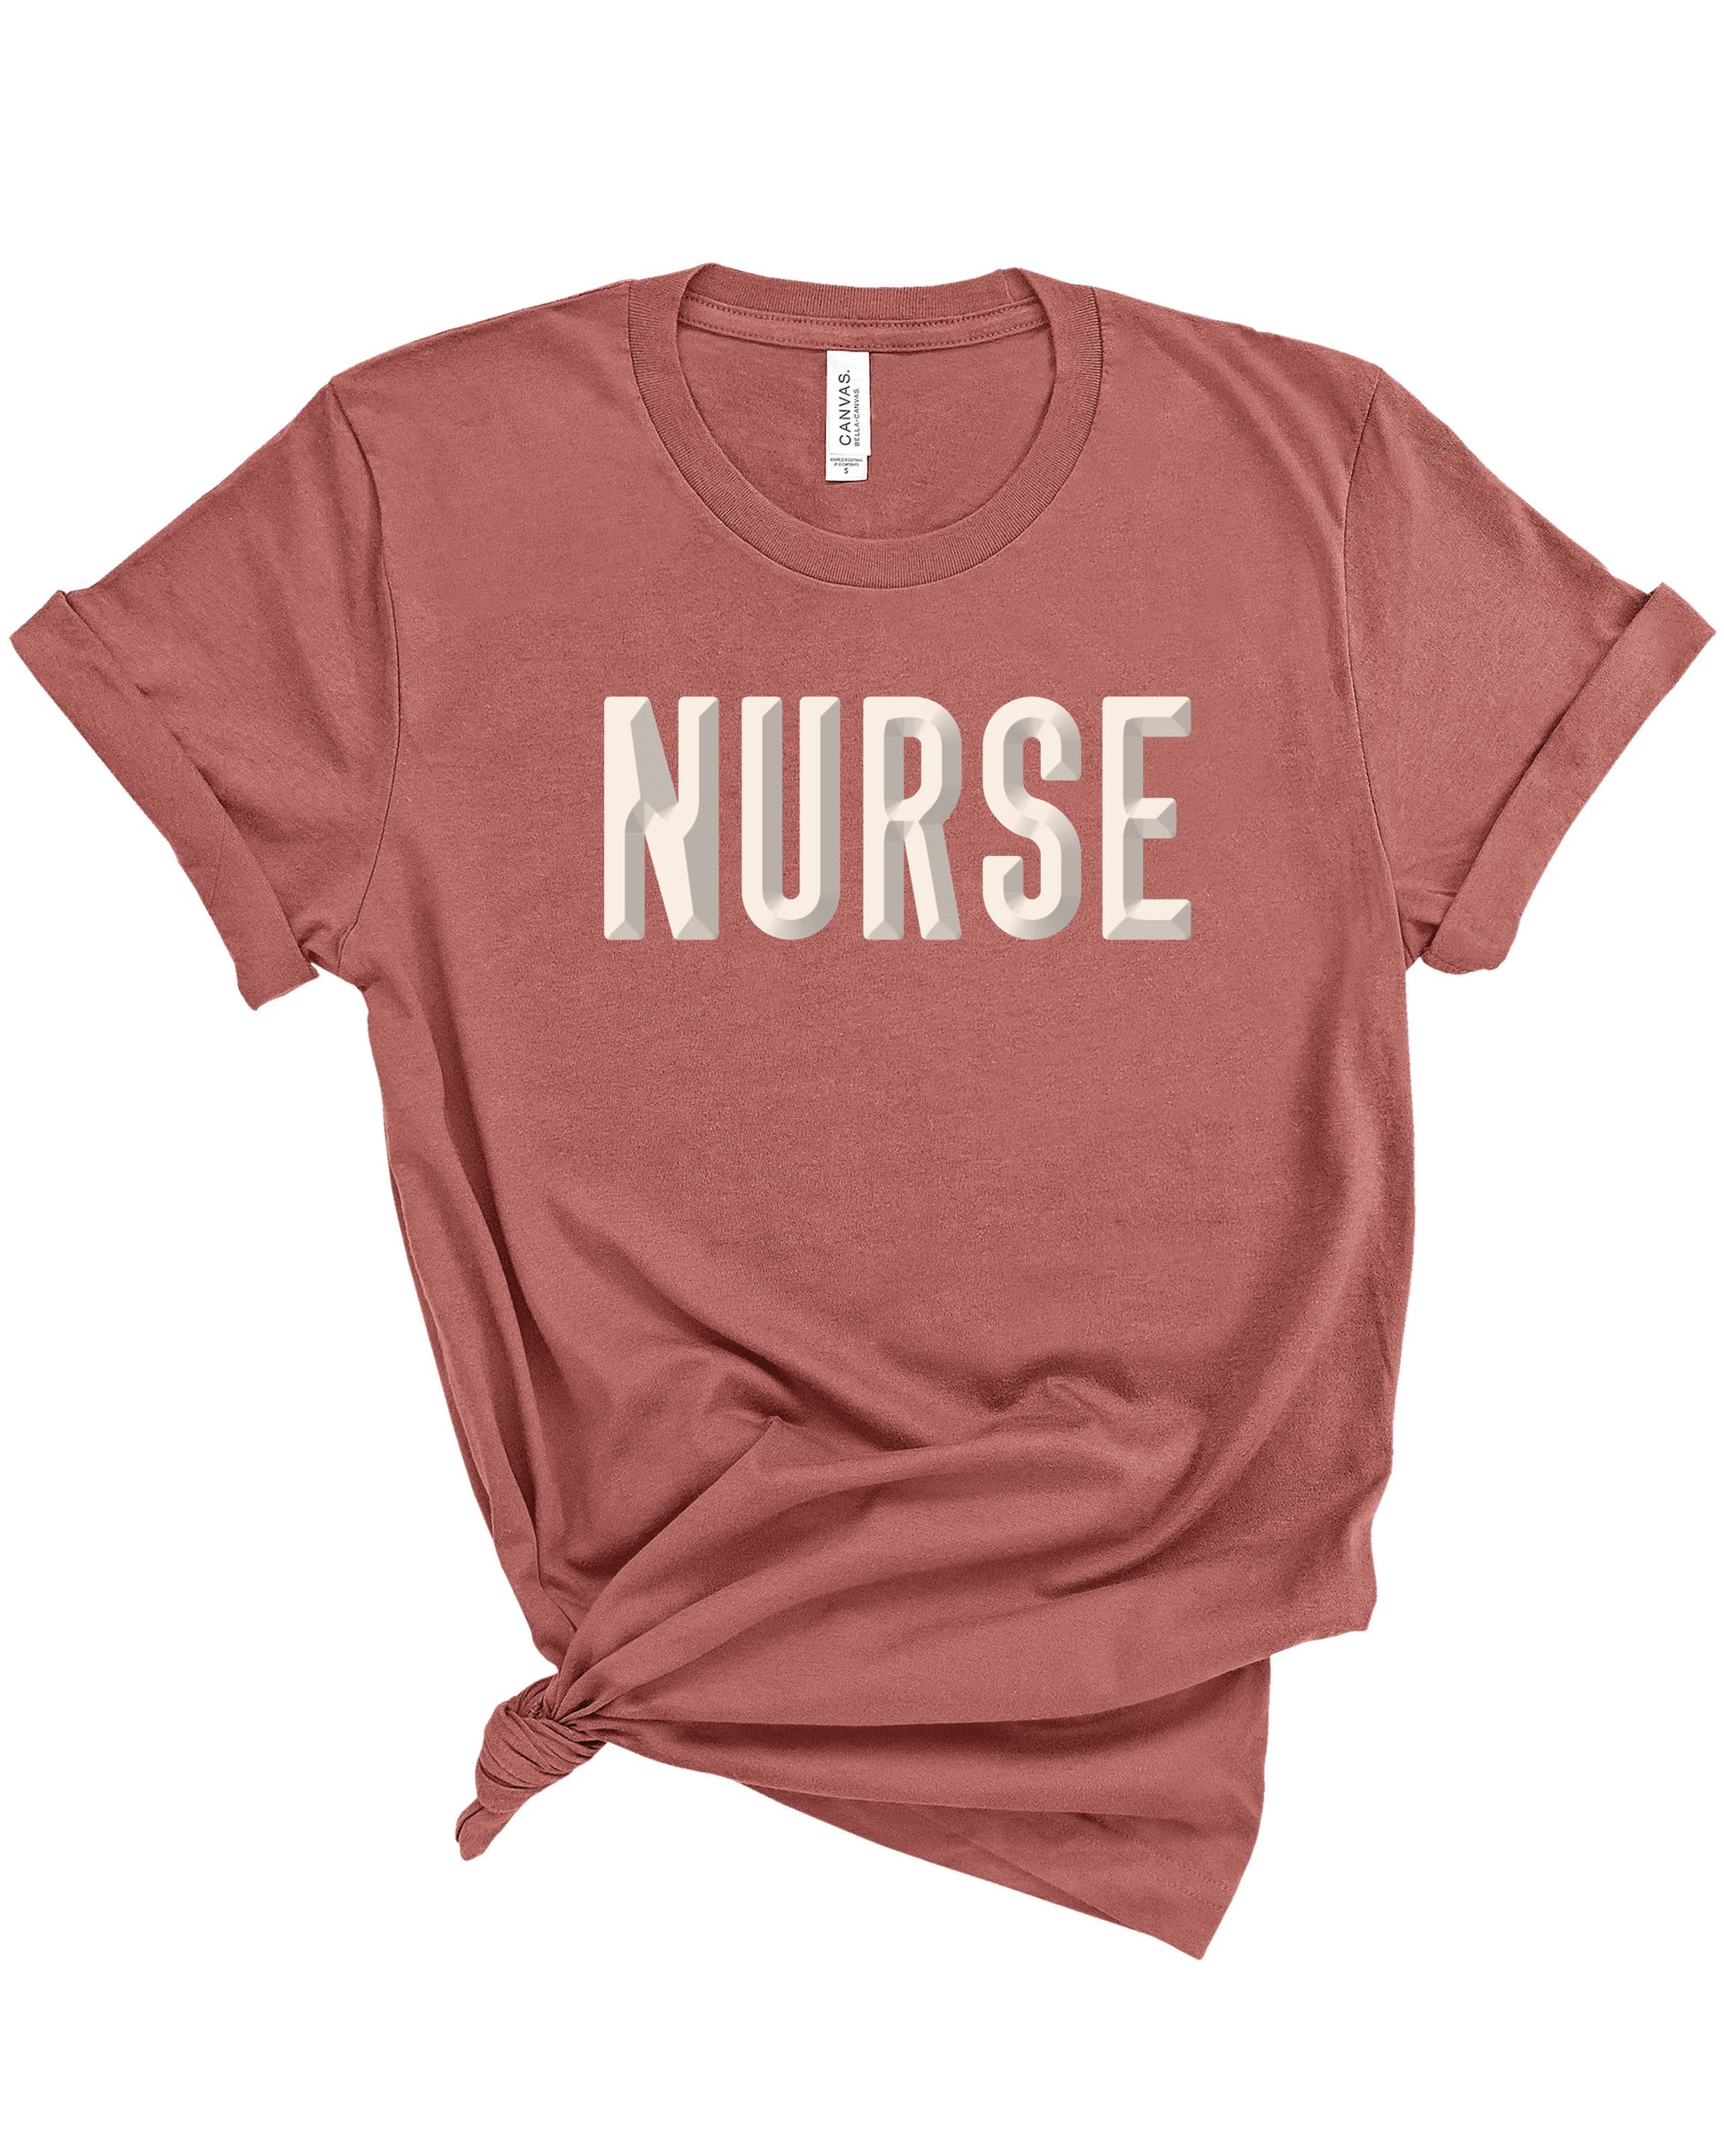 Beveled Nurse | Adult Tee-Adult Tee-Sister Shirts-Sister Shirts, Cute & Custom Tees for Mama & Littles in Trussville, Alabama.